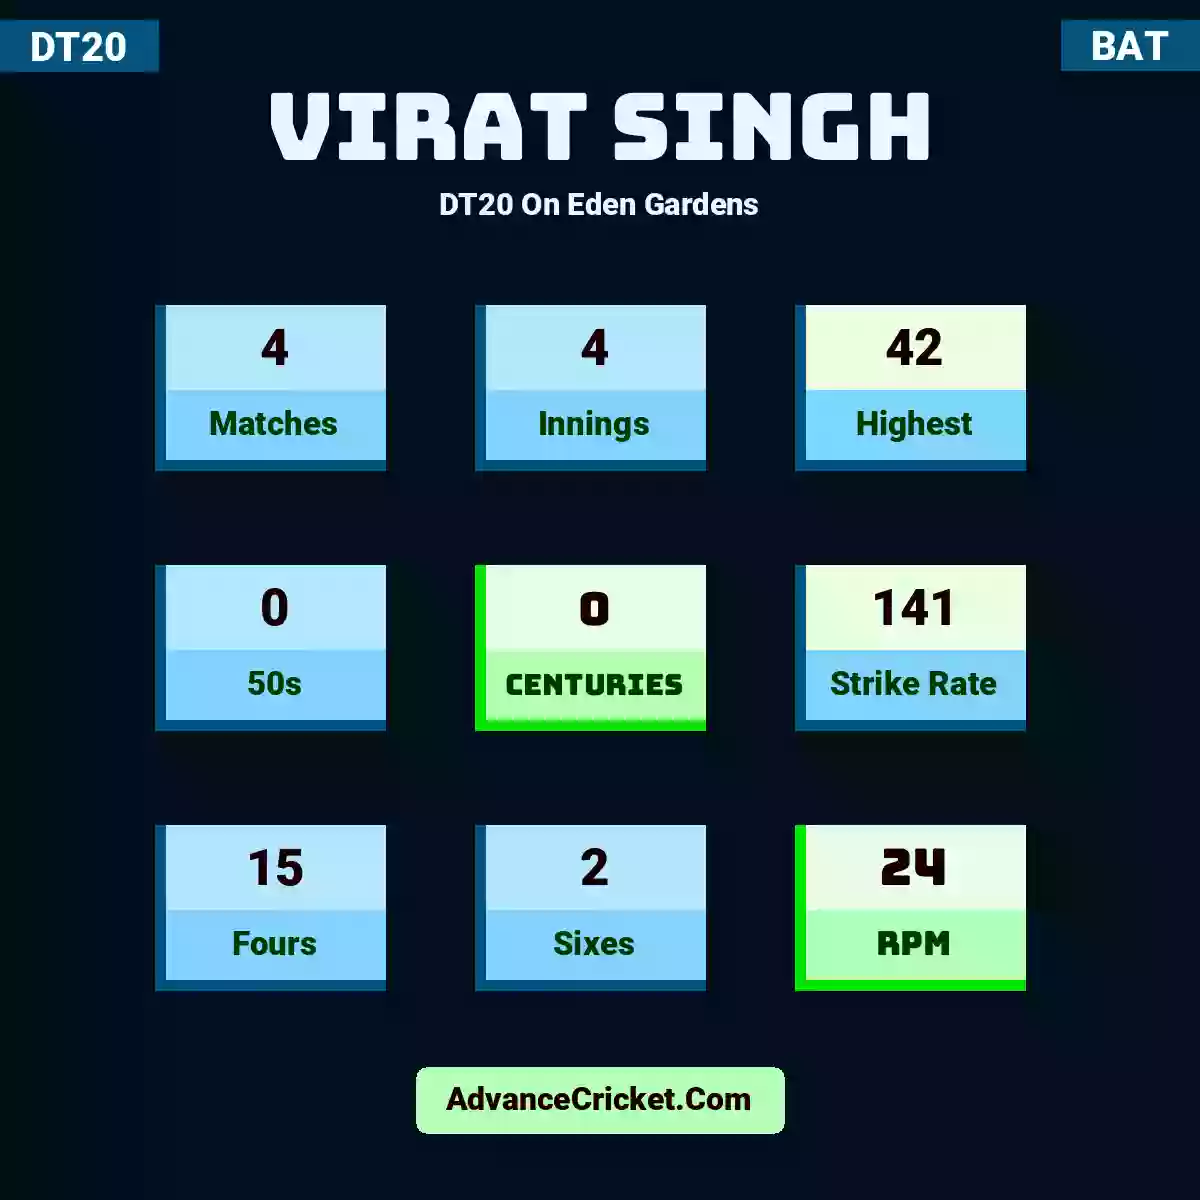 Virat Singh DT20  On Eden Gardens, Virat Singh played 4 matches, scored 42 runs as highest, 0 half-centuries, and 0 centuries, with a strike rate of 141. V.Singh hit 15 fours and 2 sixes, with an RPM of 24.